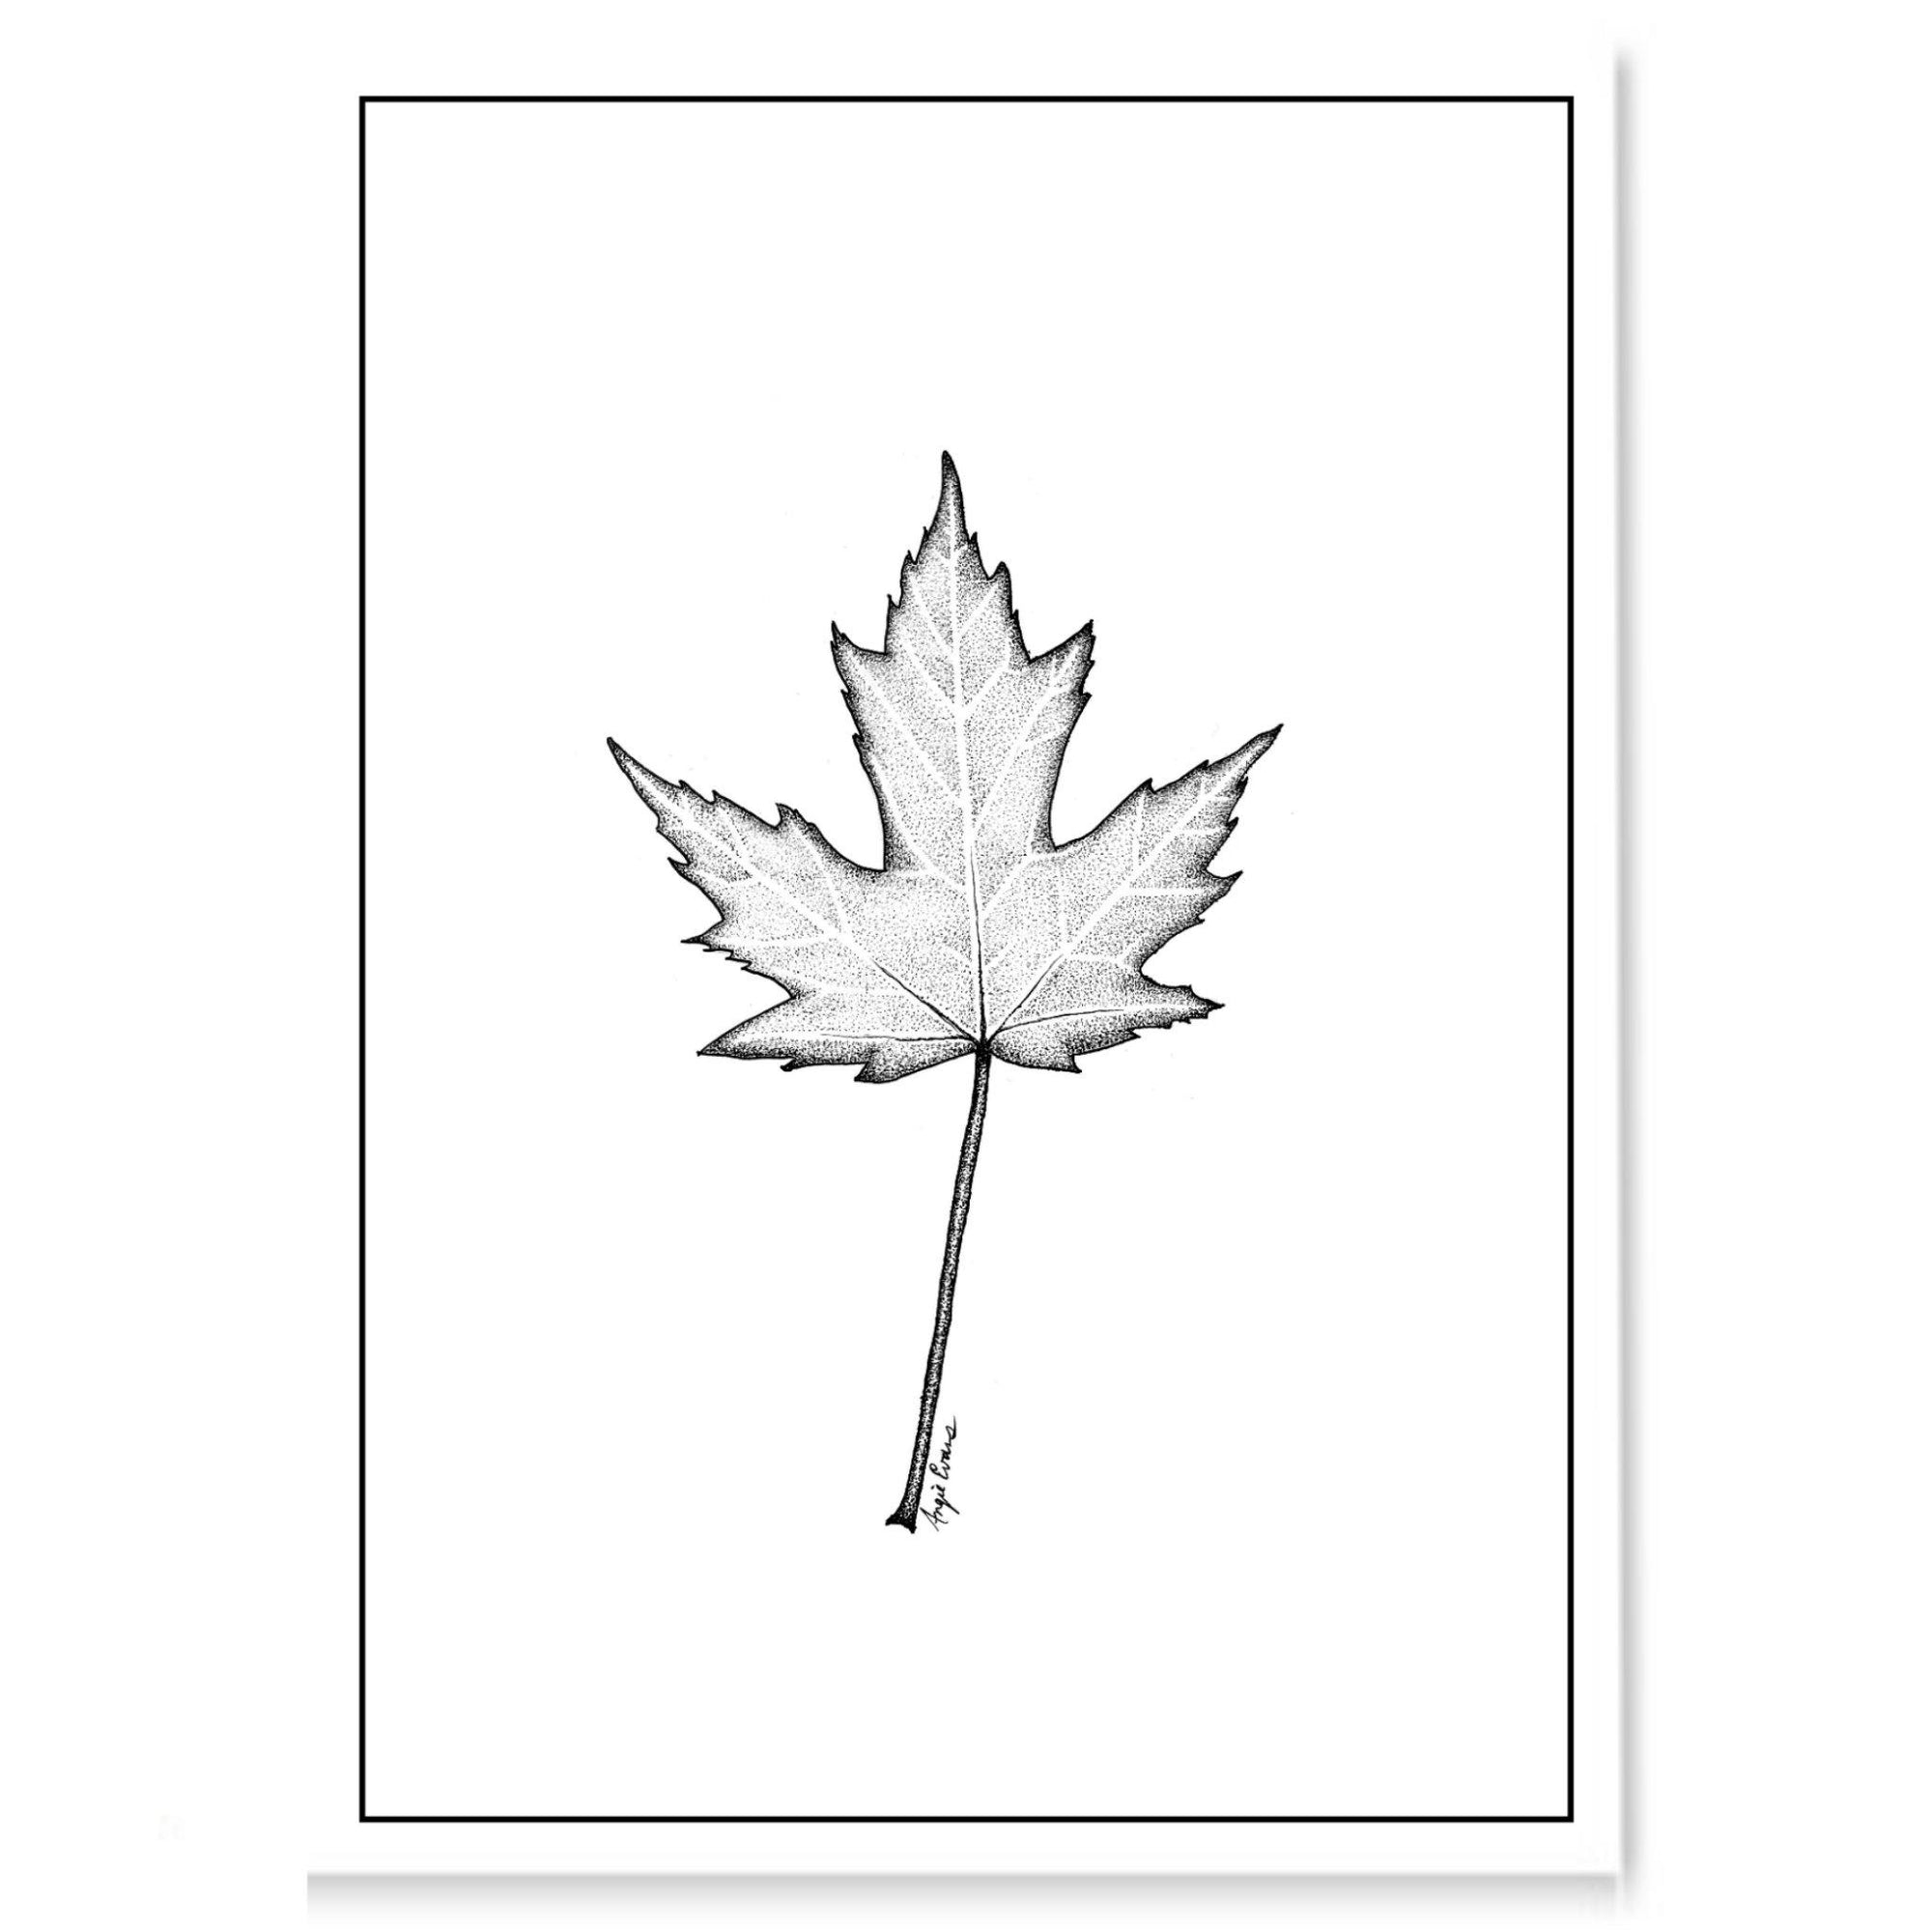 Maple leaf drawing Stock Photos, Royalty Free Maple leaf drawing Images |  Depositphotos